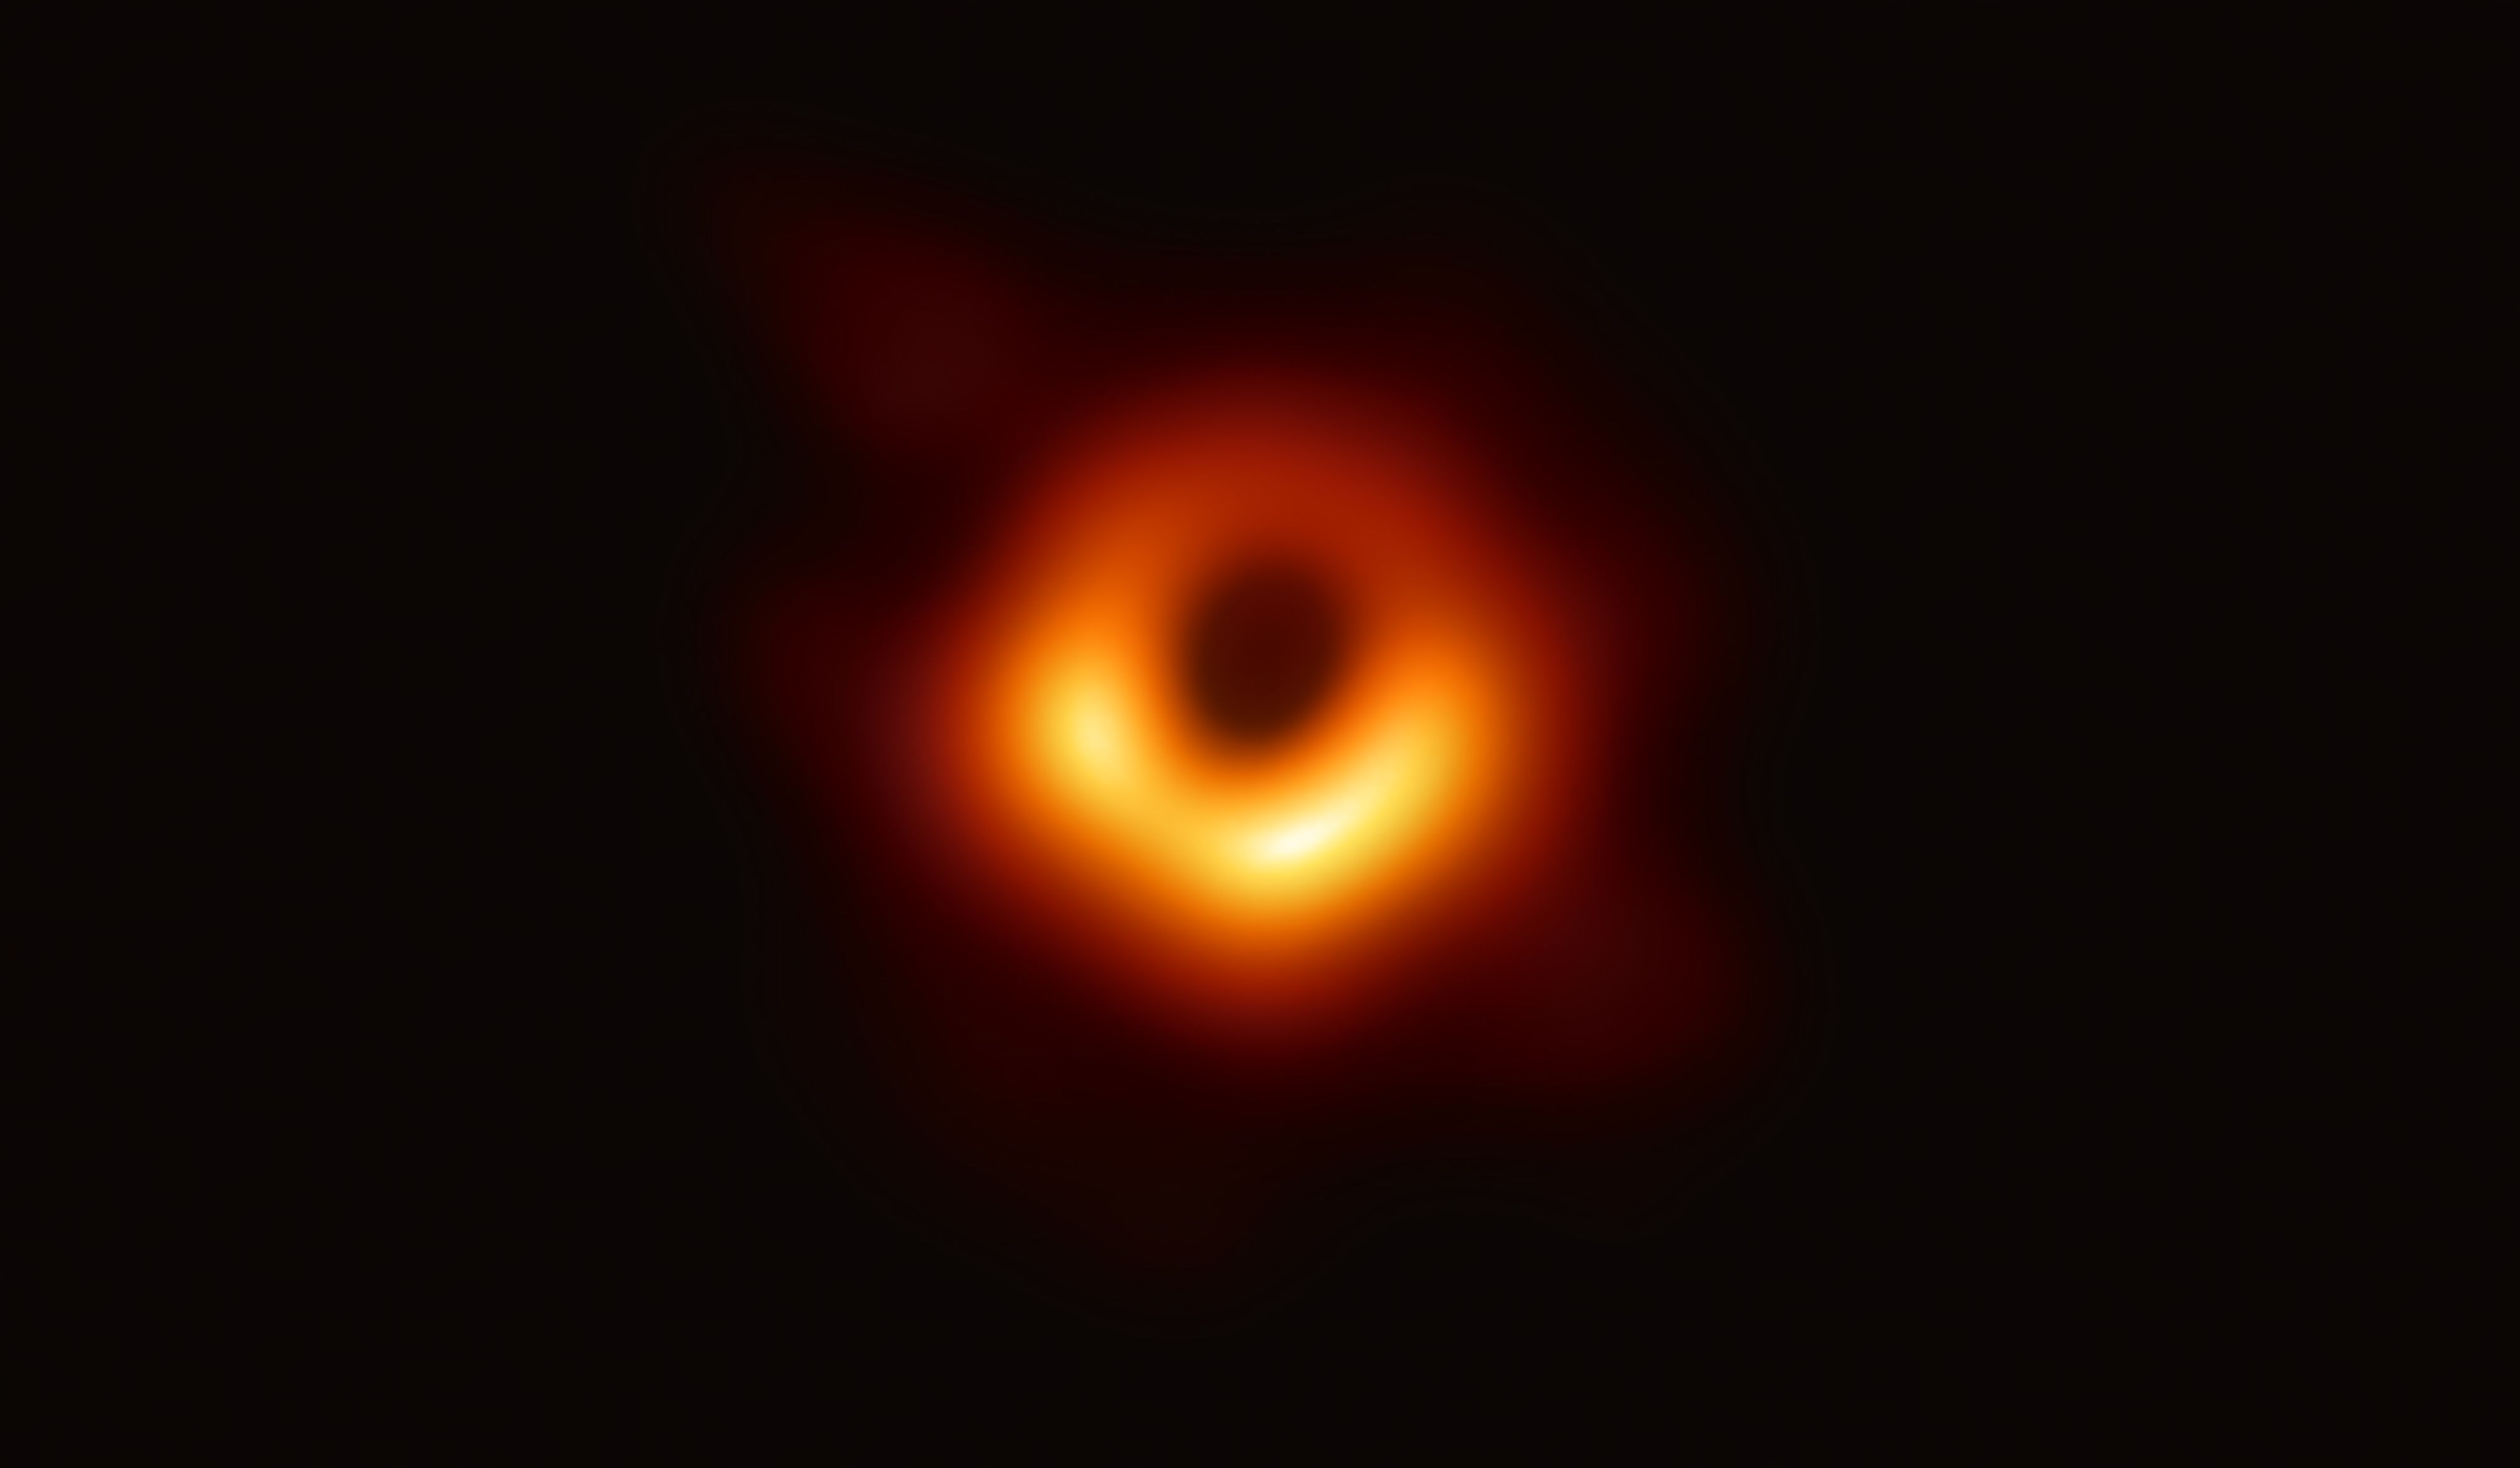 black hole and people